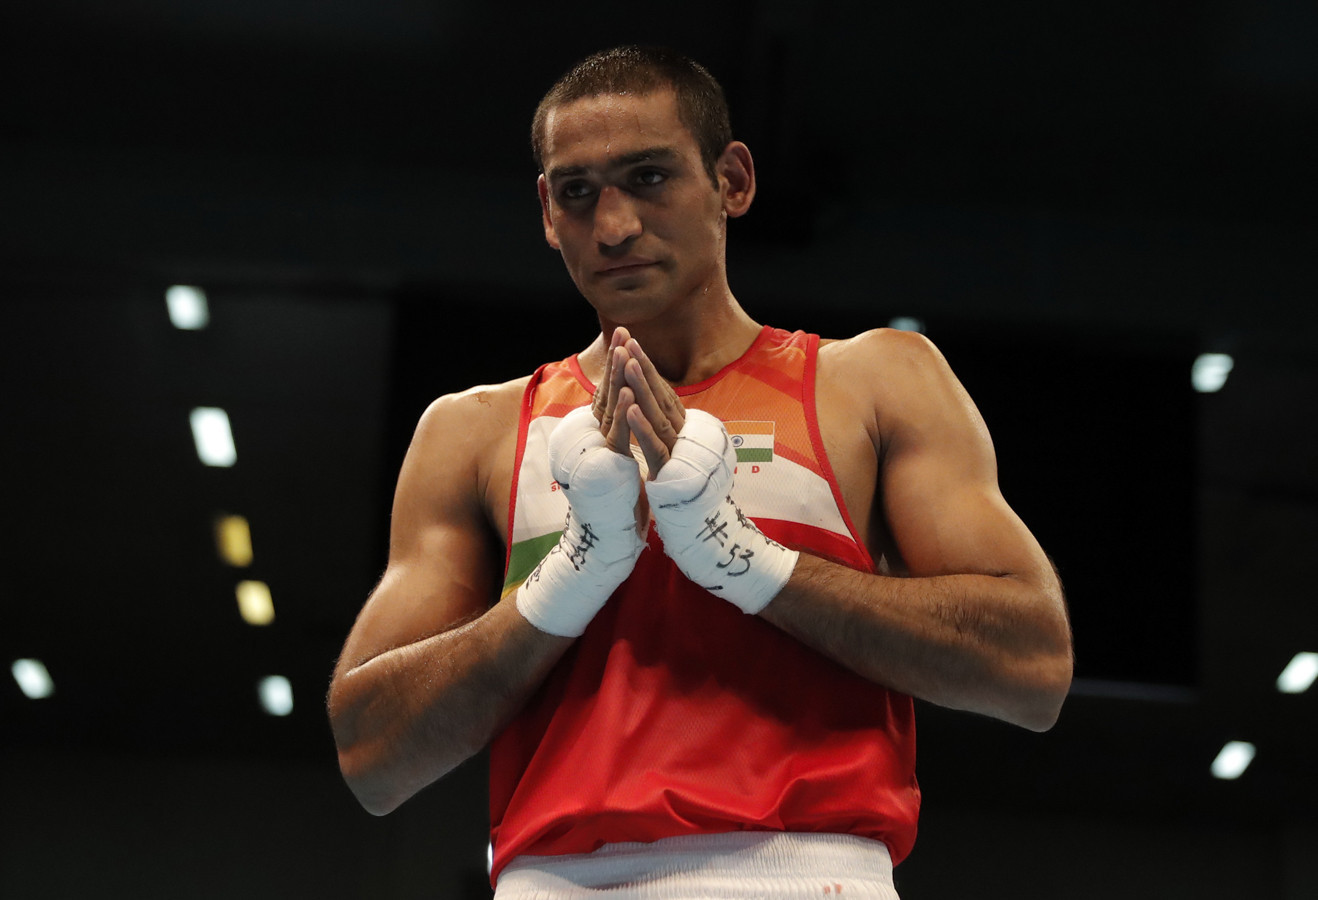 Sports Minister says boxing will be key as India aims to crack Olympics top 10